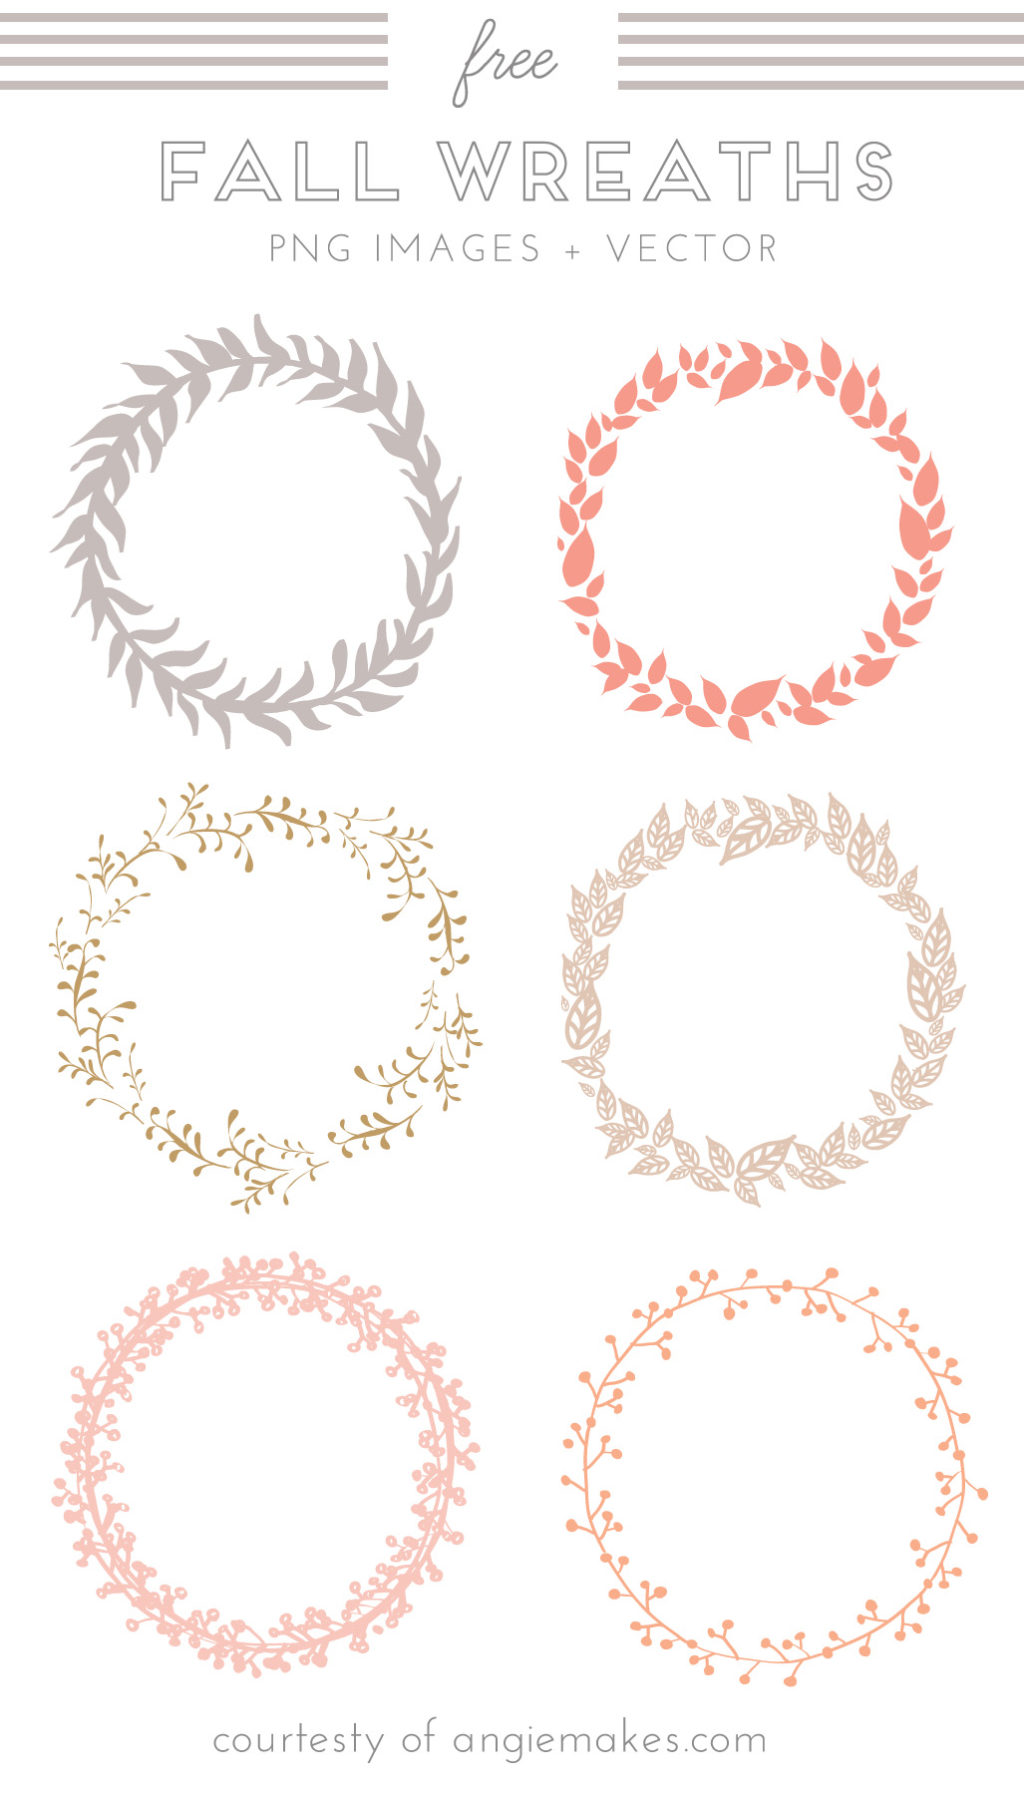 free wreath clip art. Fall Wreath Images and Vector Clip Art | angiemakes.com